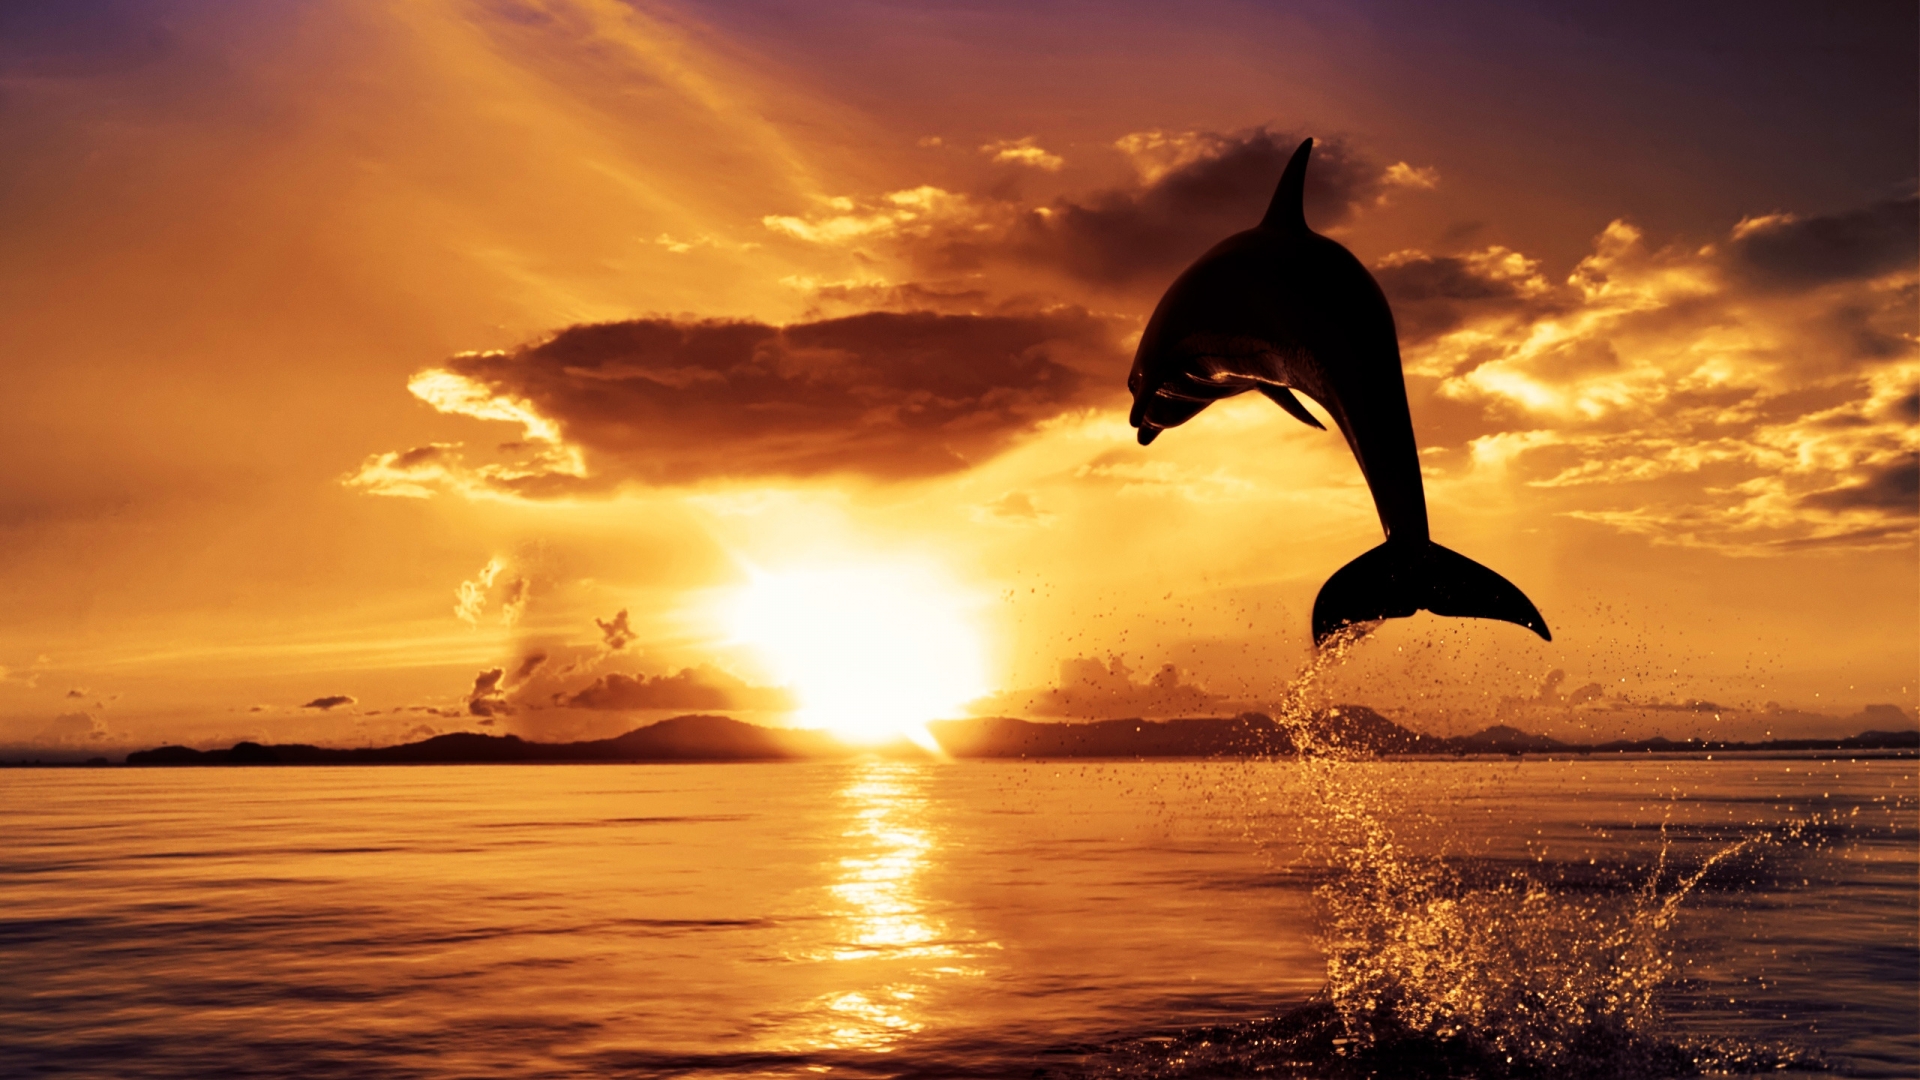 Dolphin in the Air for 1920 x 1080 HDTV 1080p resolution